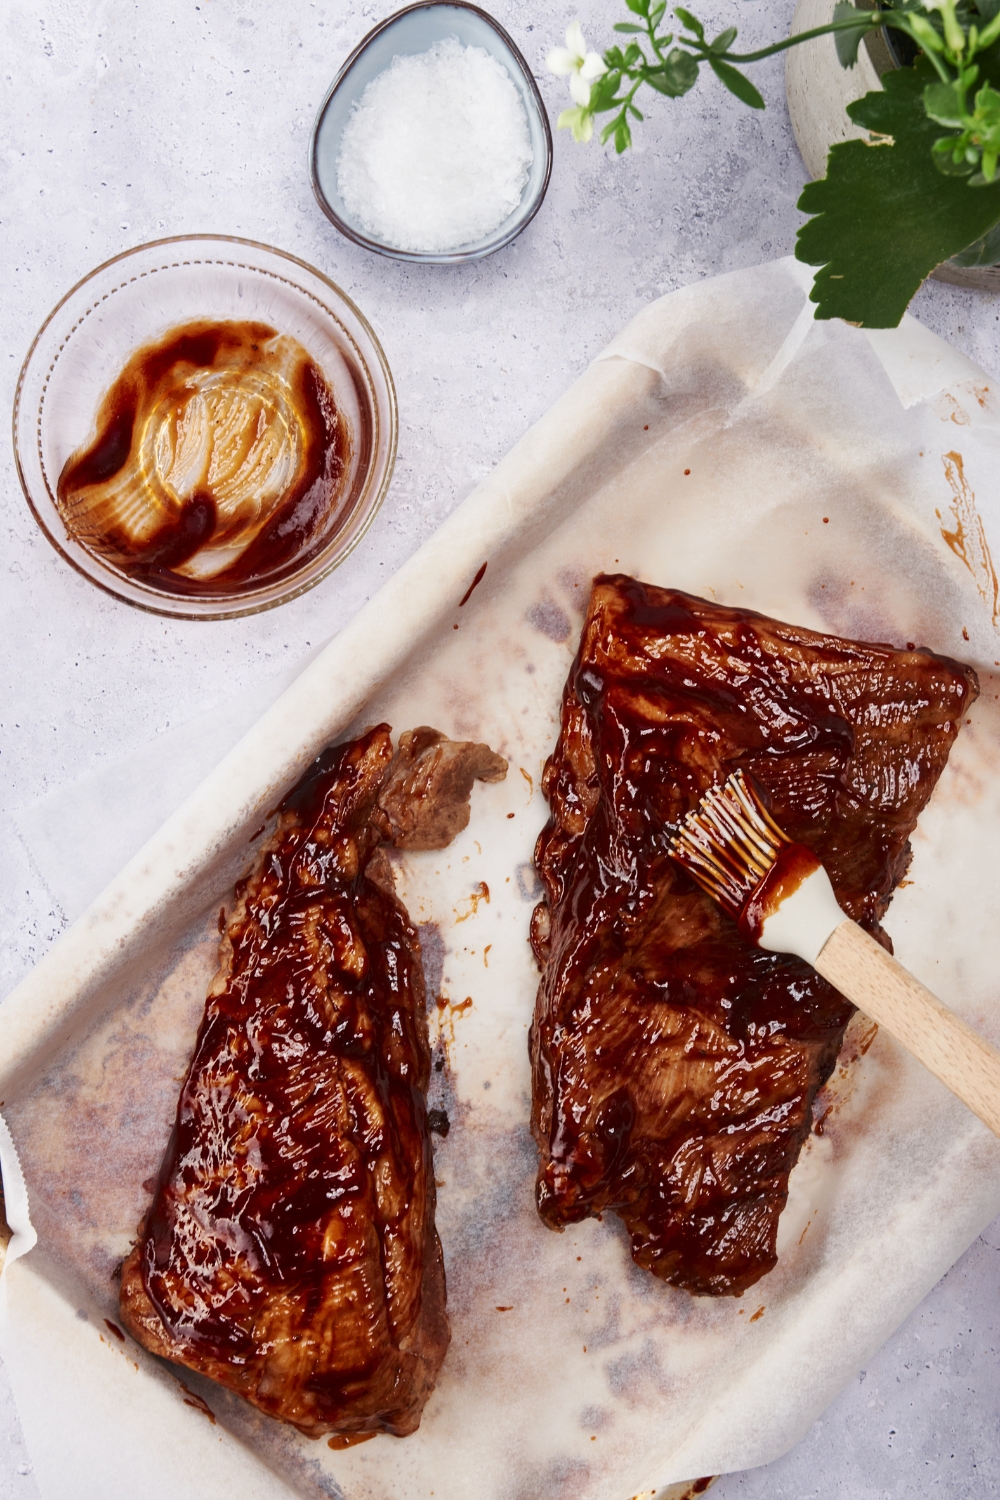 Cooked ribs being coated in barbecue sauce with a silicone basting brush. The ribs are on a baking sheet lined with parchment paper and there is an empty bowl of barbecue sauce next to the ribs.